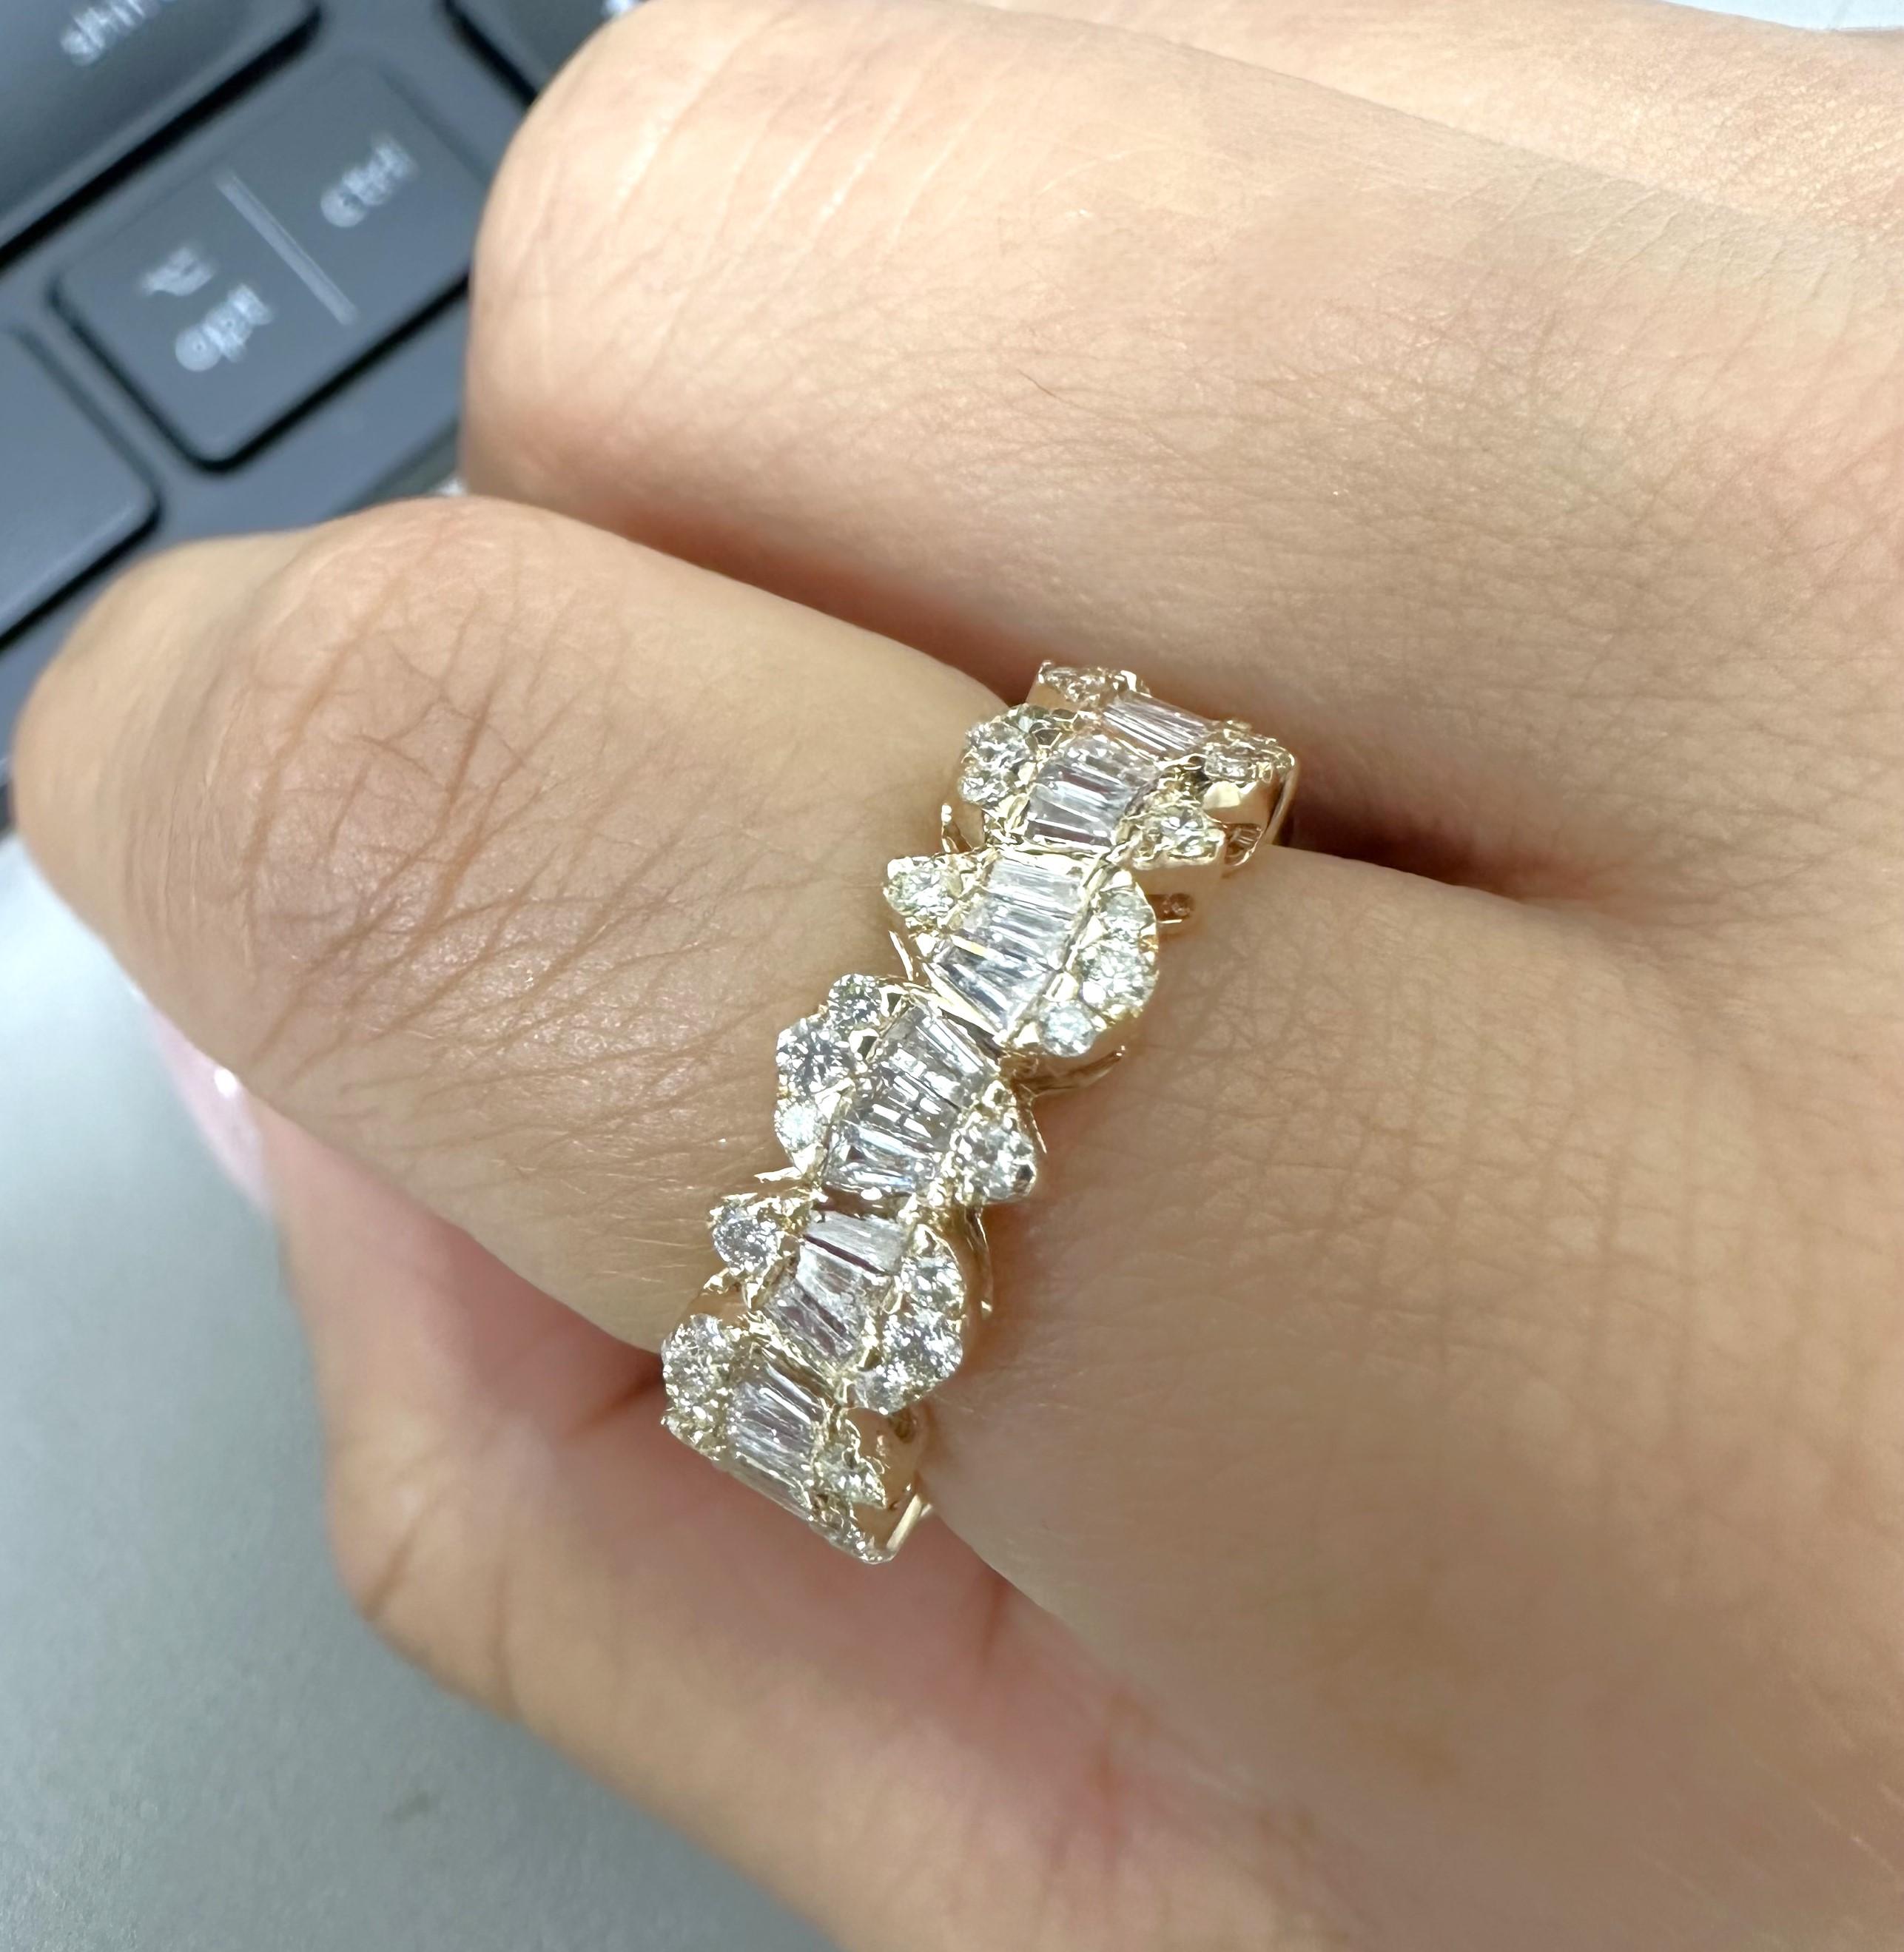 Baguette Cut Baguette And Round Cut Diamond Eternity Band Ring 14K Yellow Gold 2.12Ctw SZ 7.5 For Sale